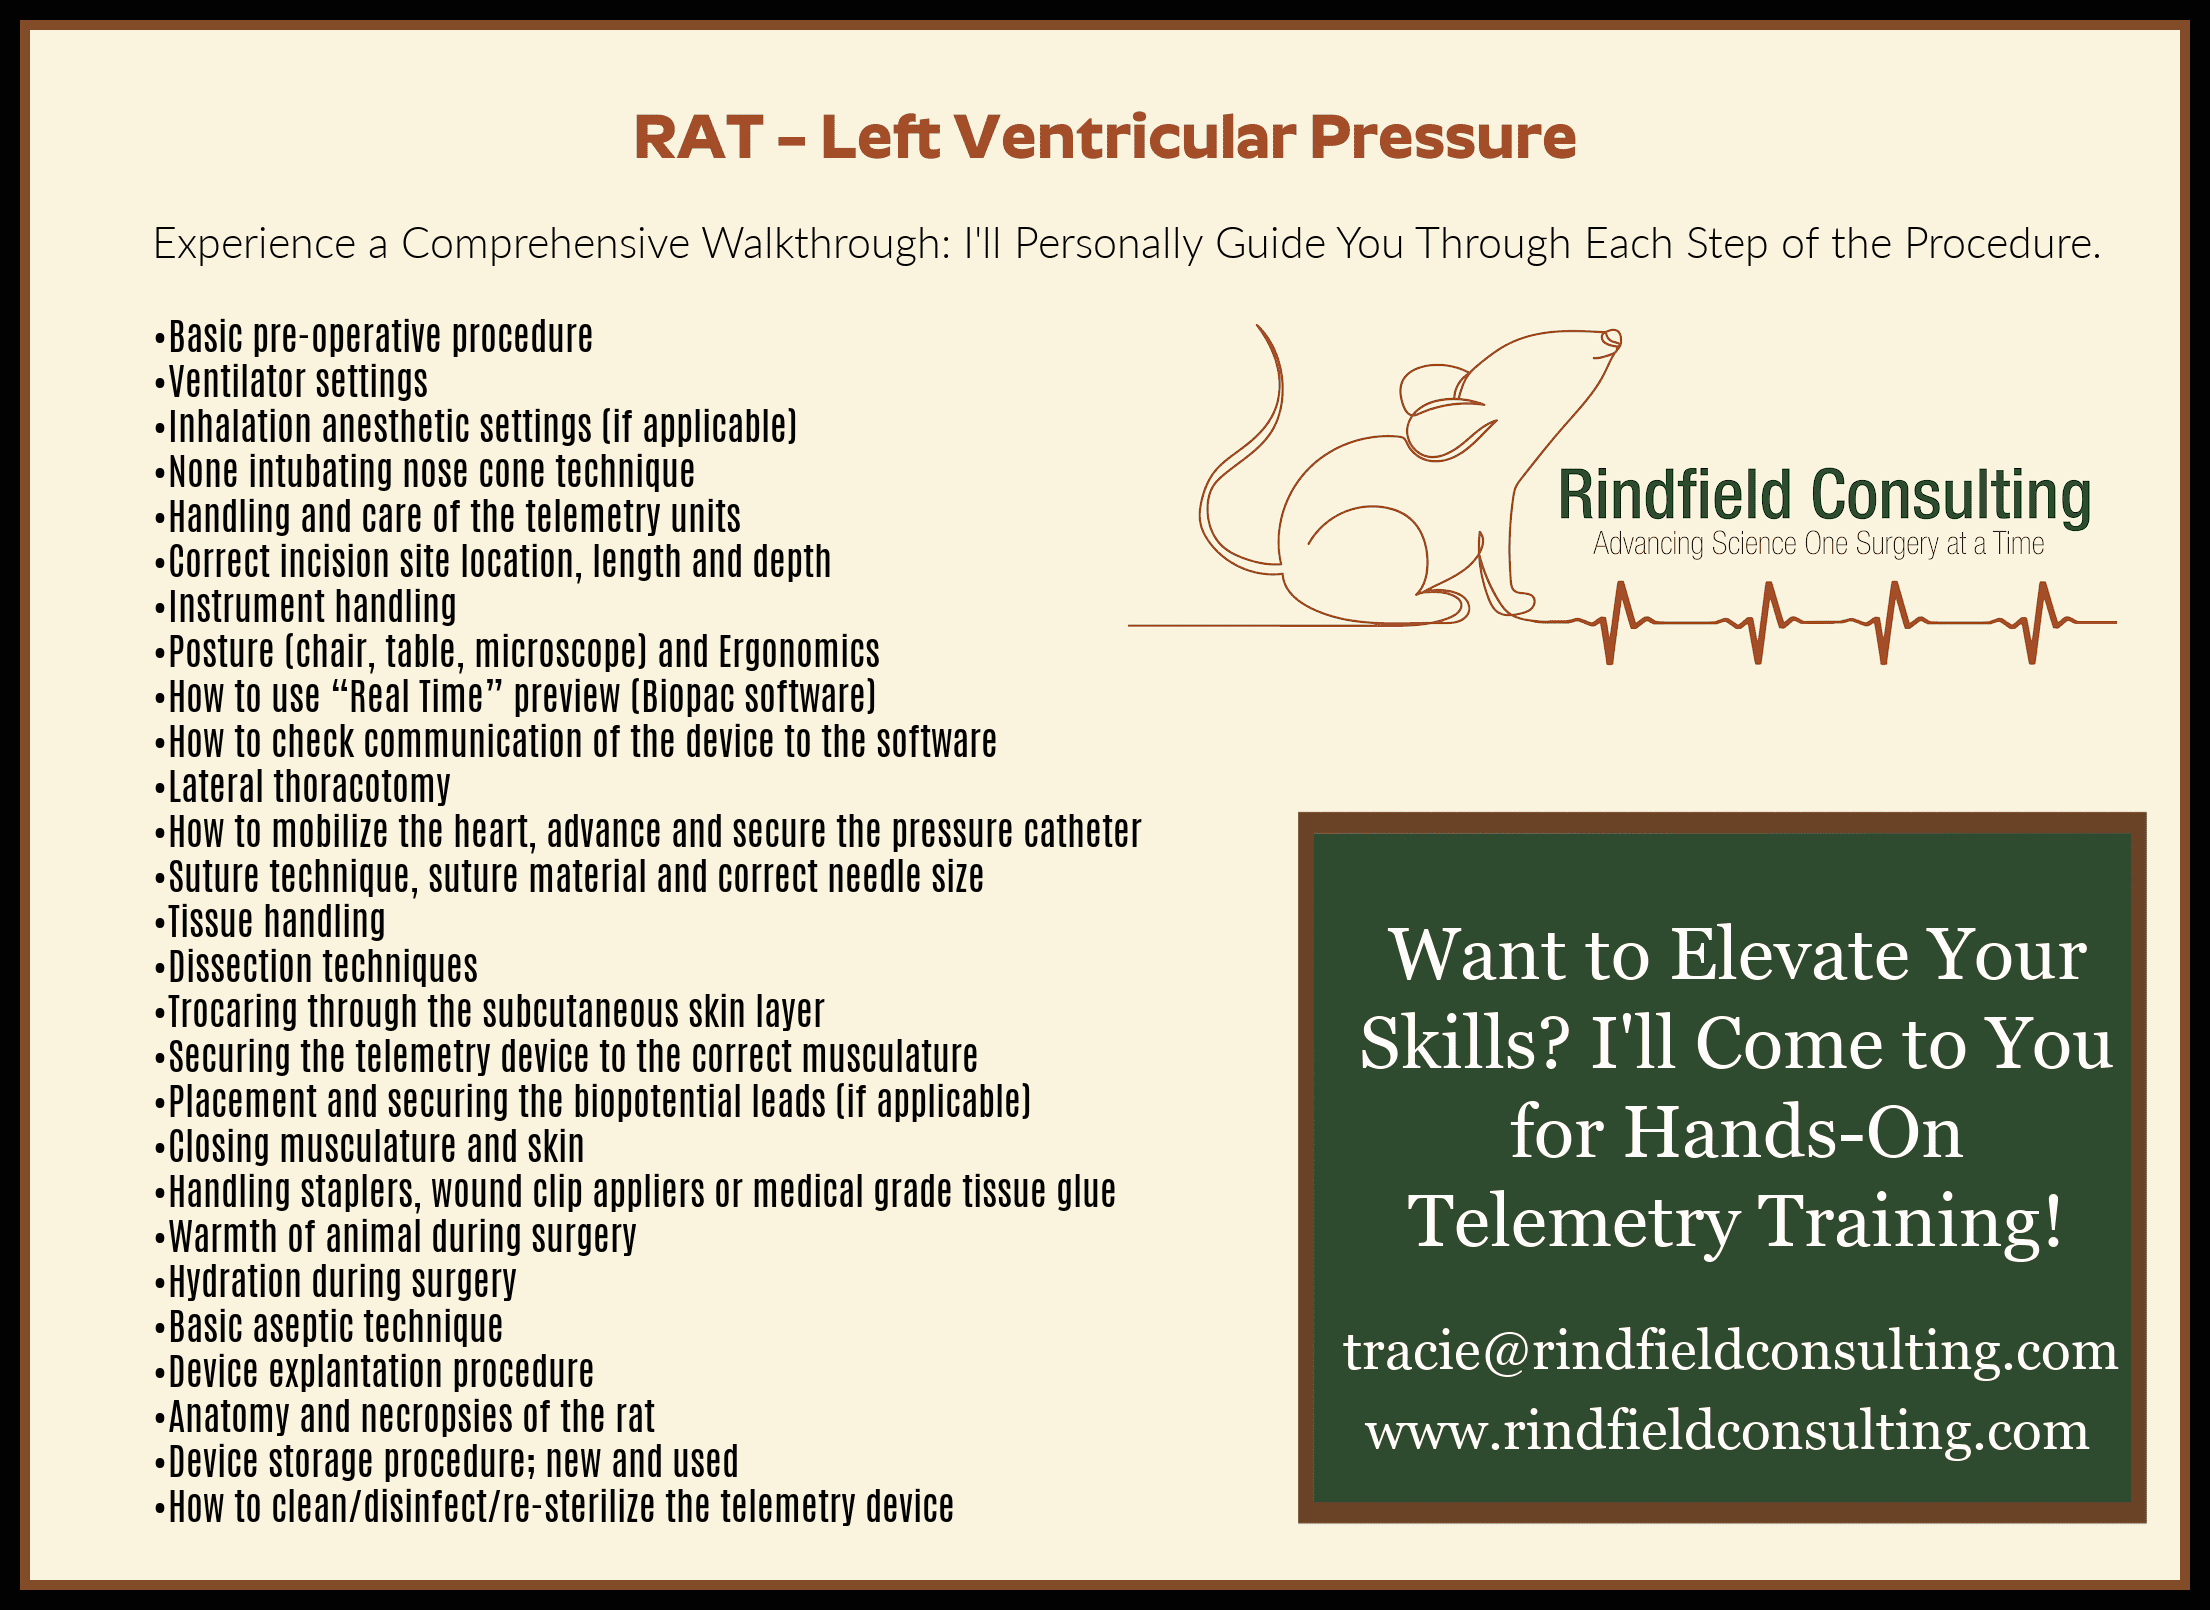 A brochure for the rat-left ventricular pressure.